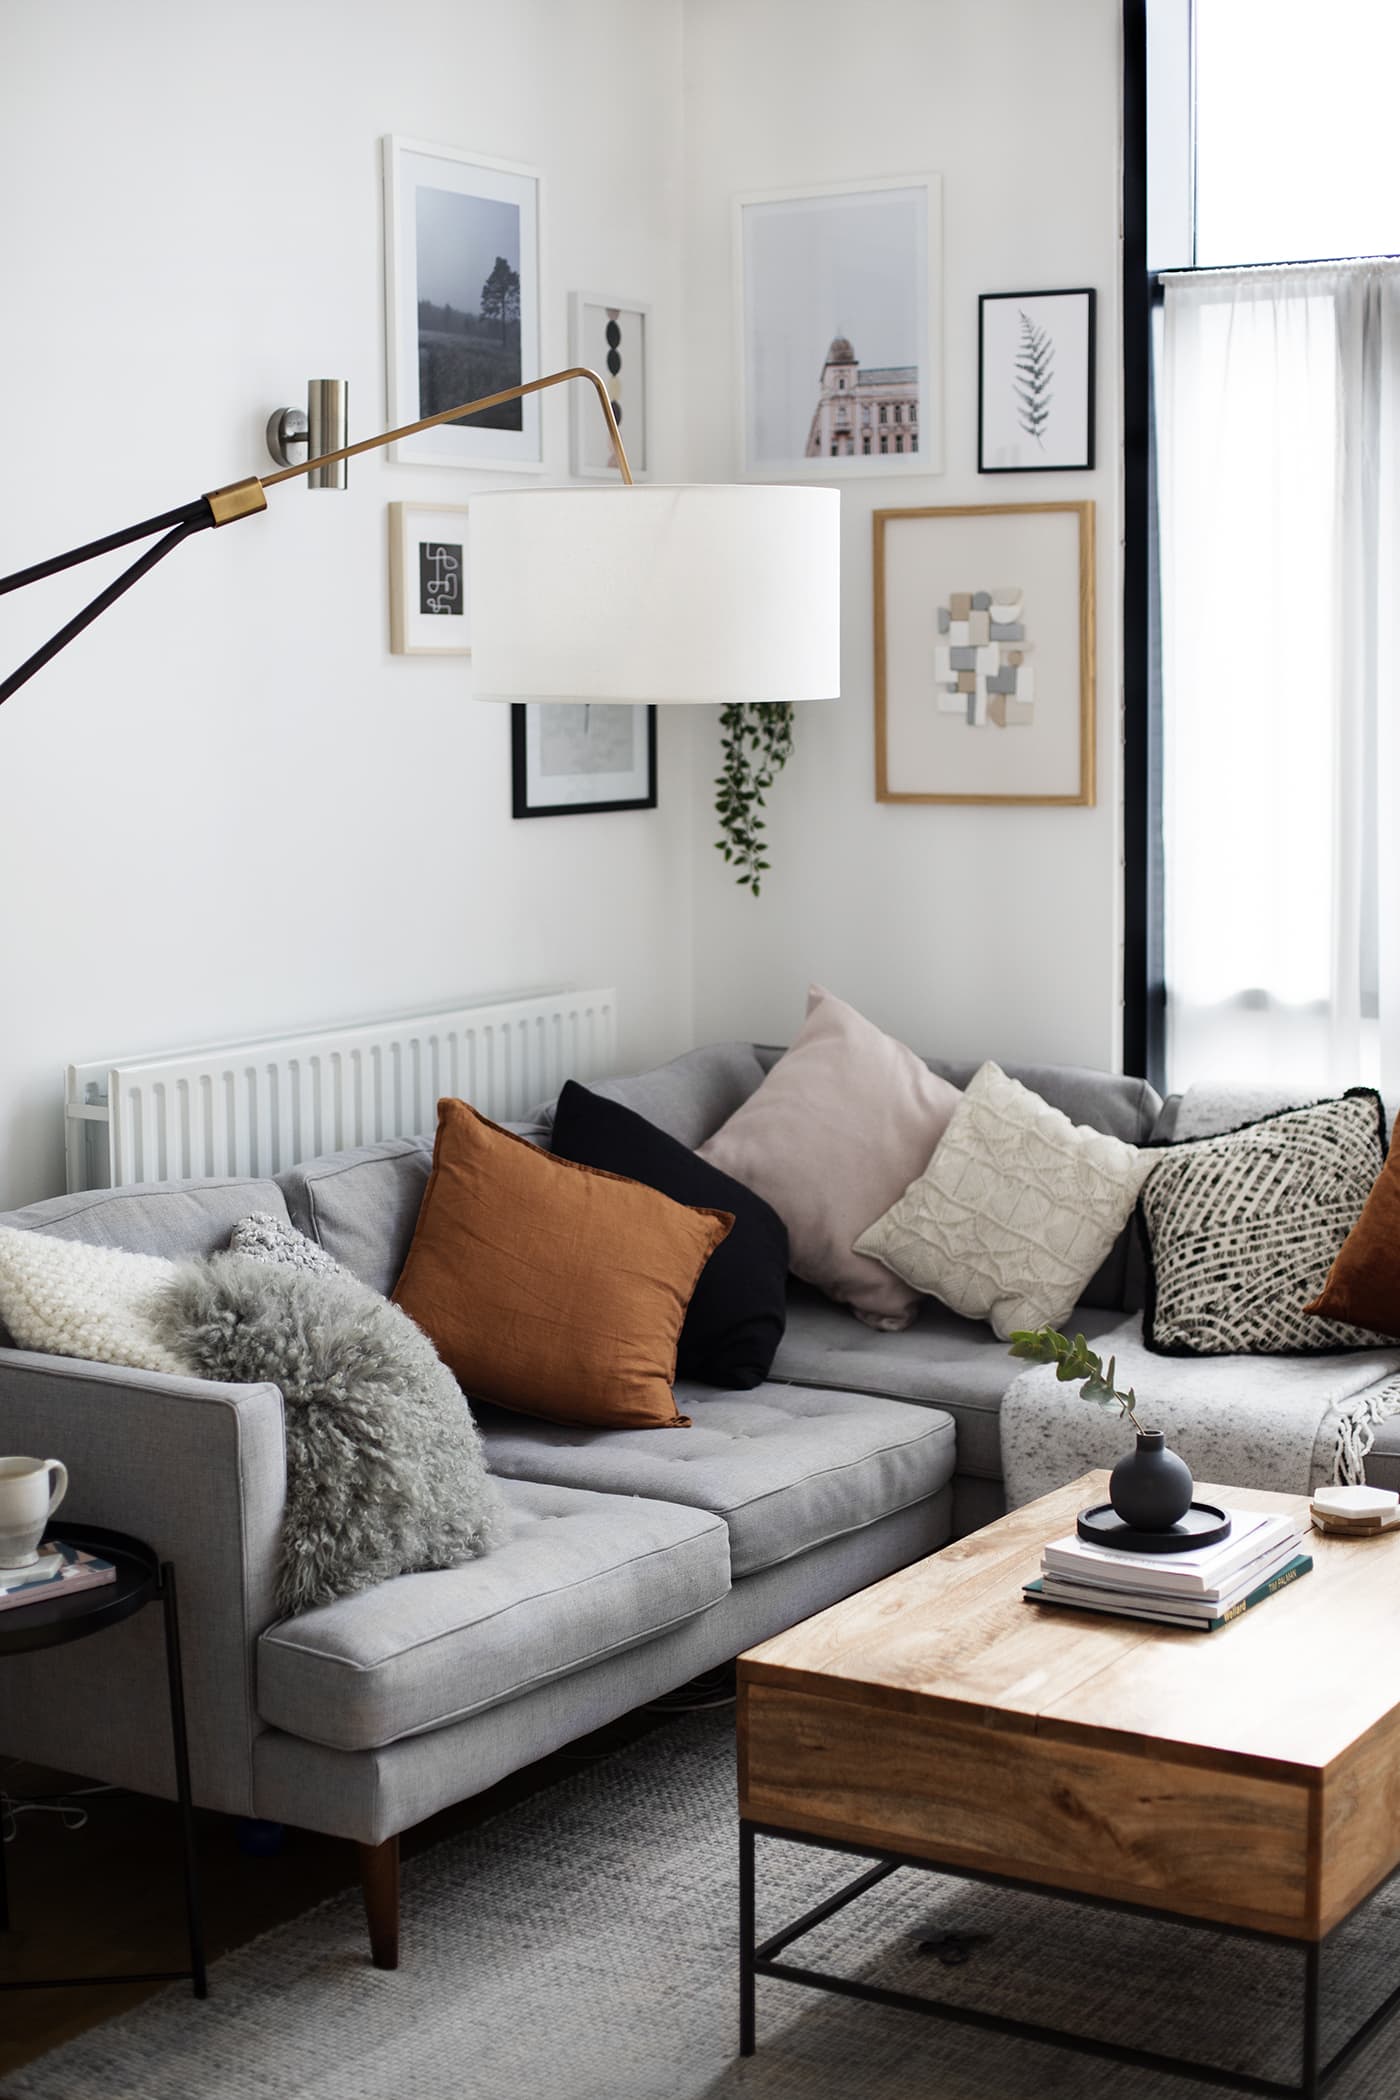 cushions to match grey couch